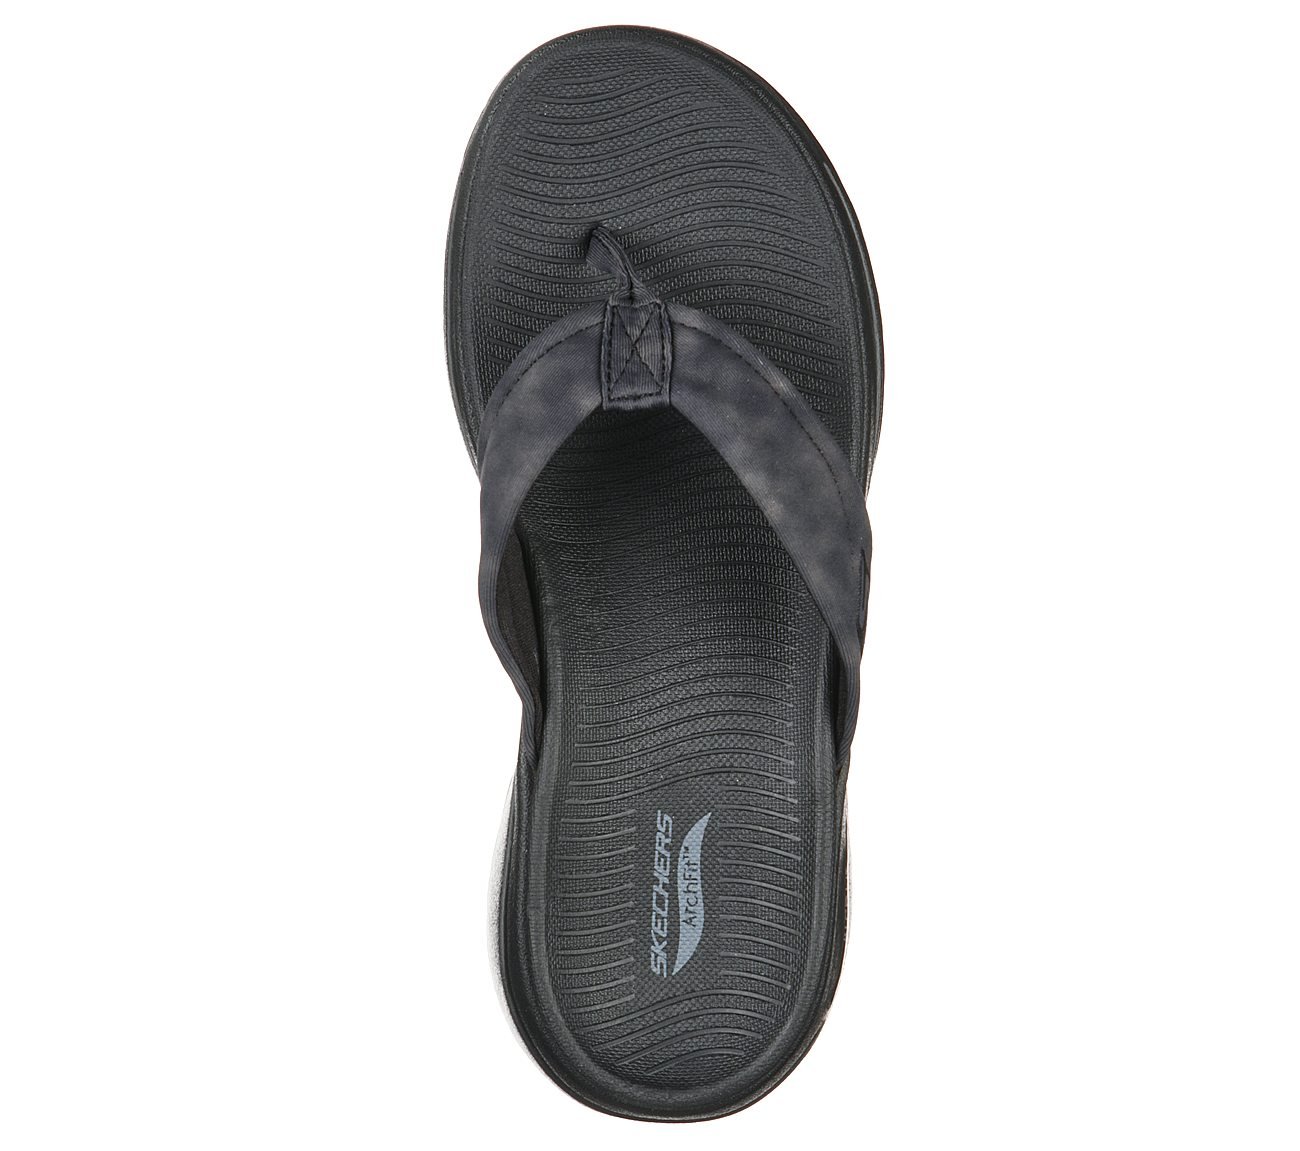 Skechers Black Go Walk Arch Fit Astound Slippers For Women - Style ID ...